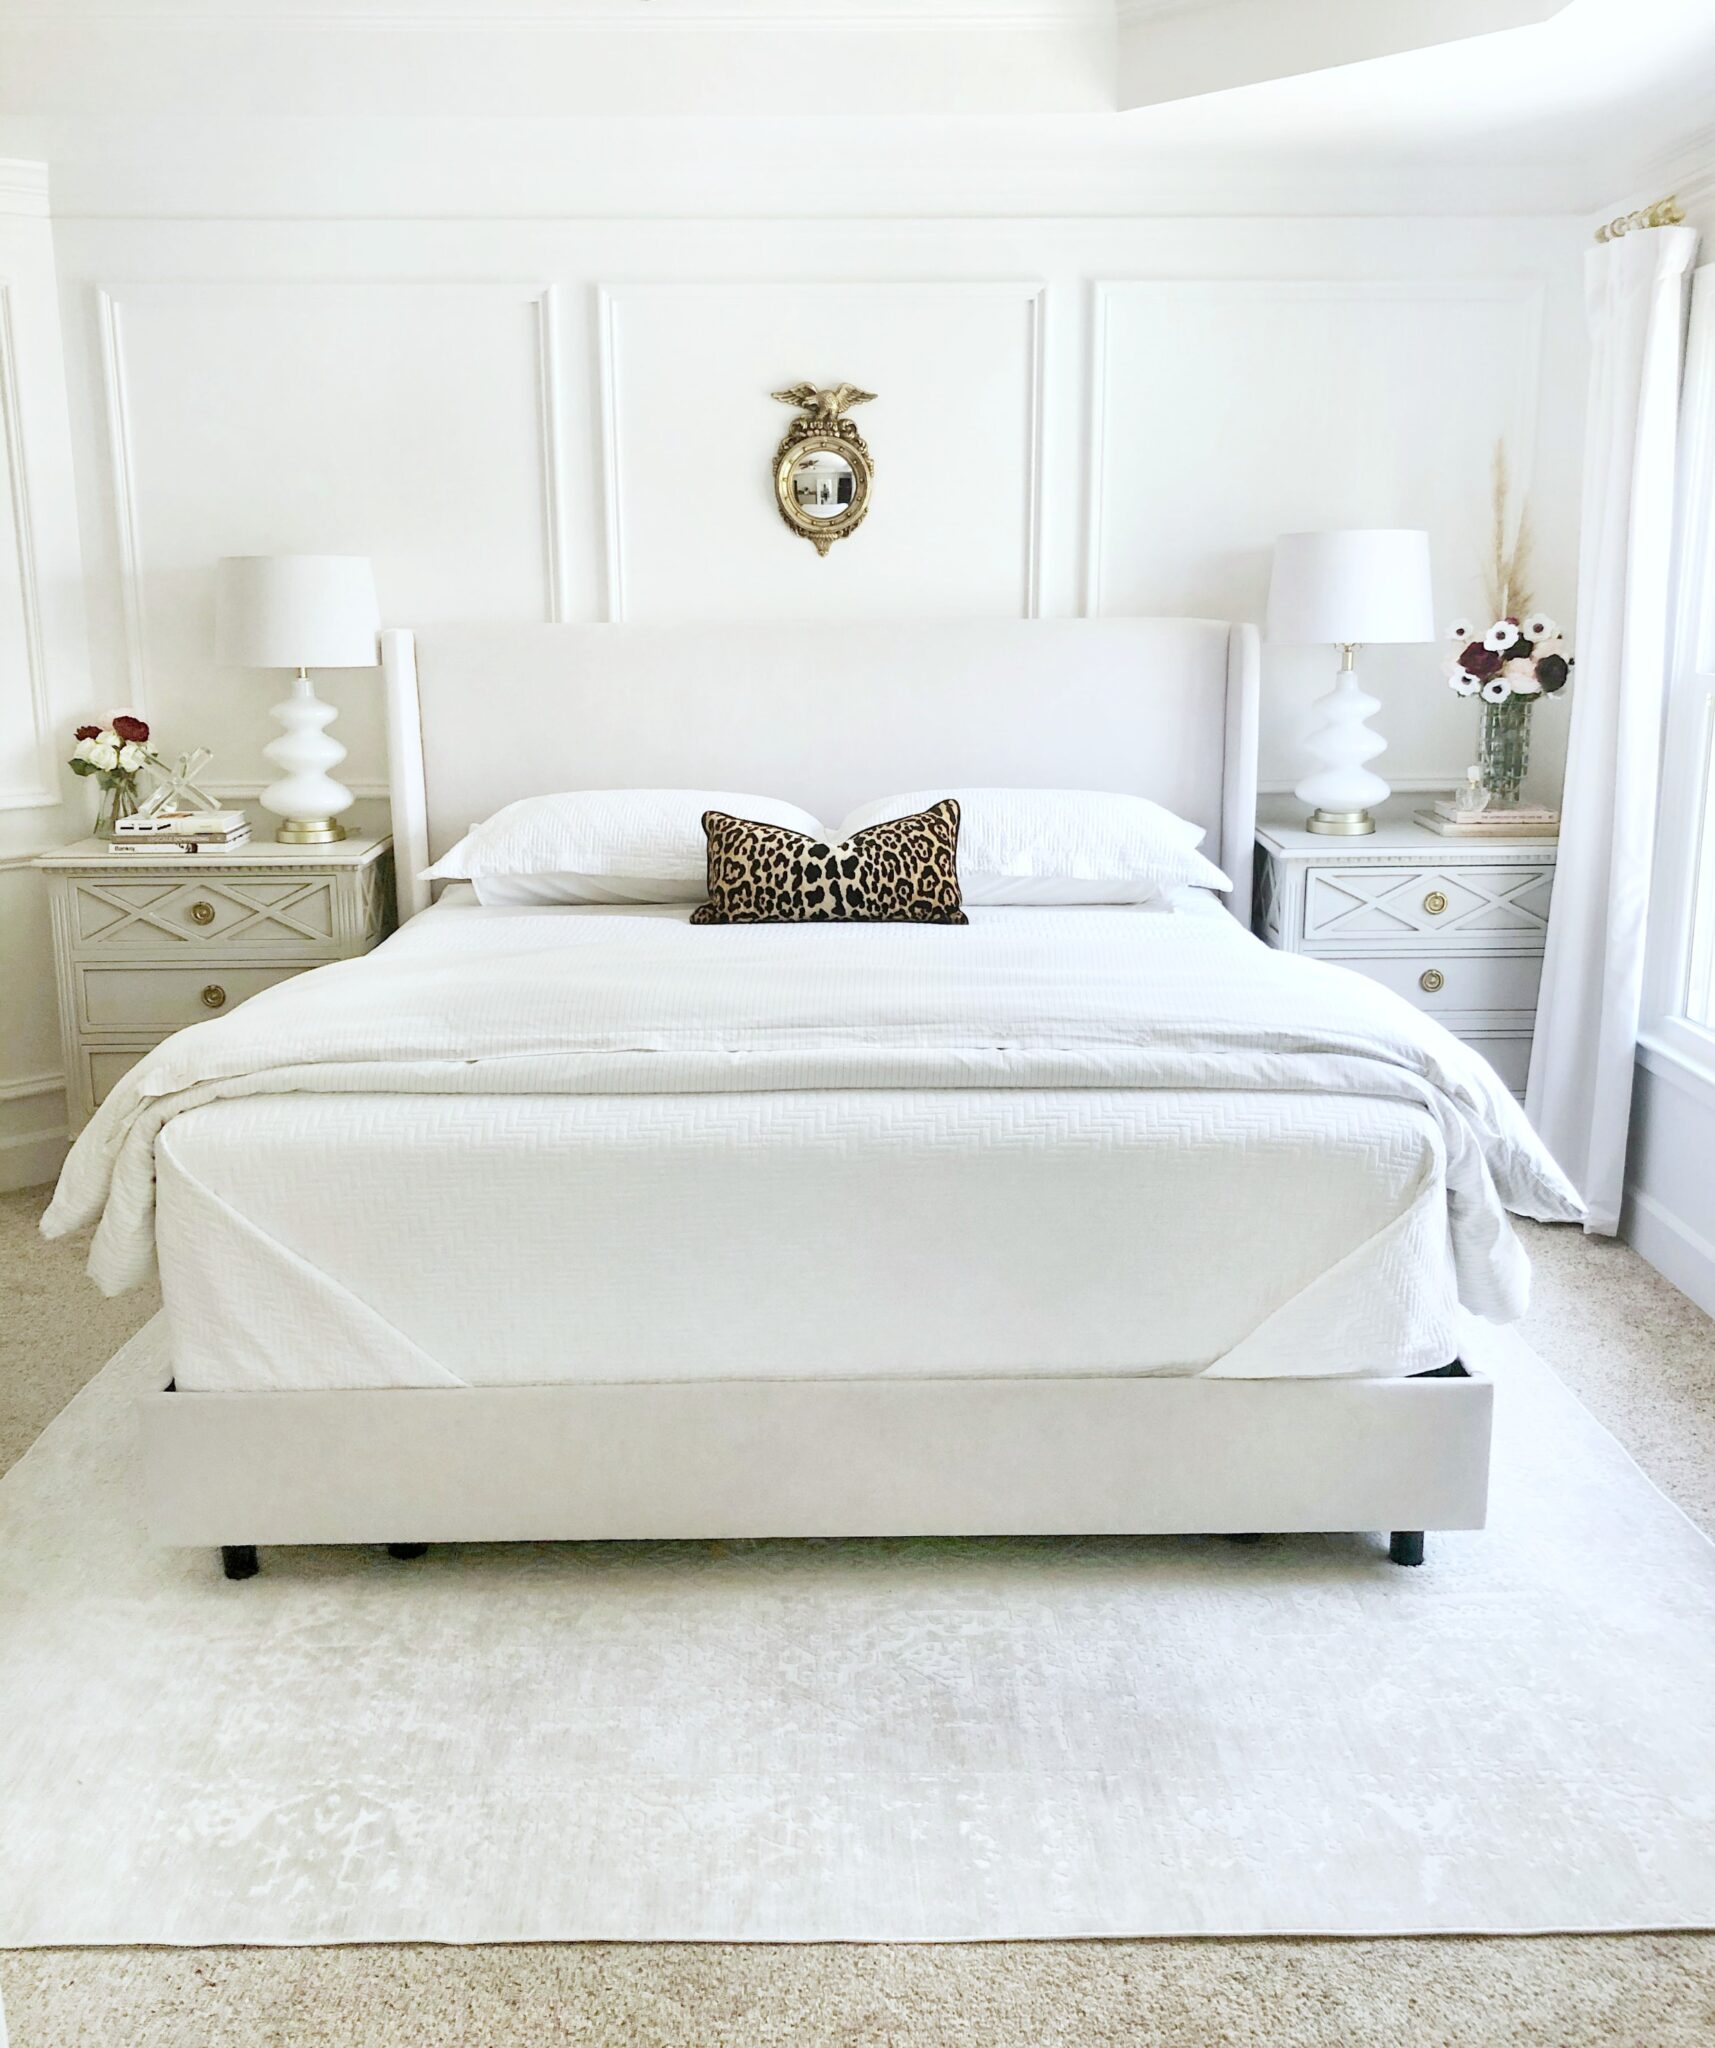 5 Things You Should Have In Your Bedroom To Keep It Tidy